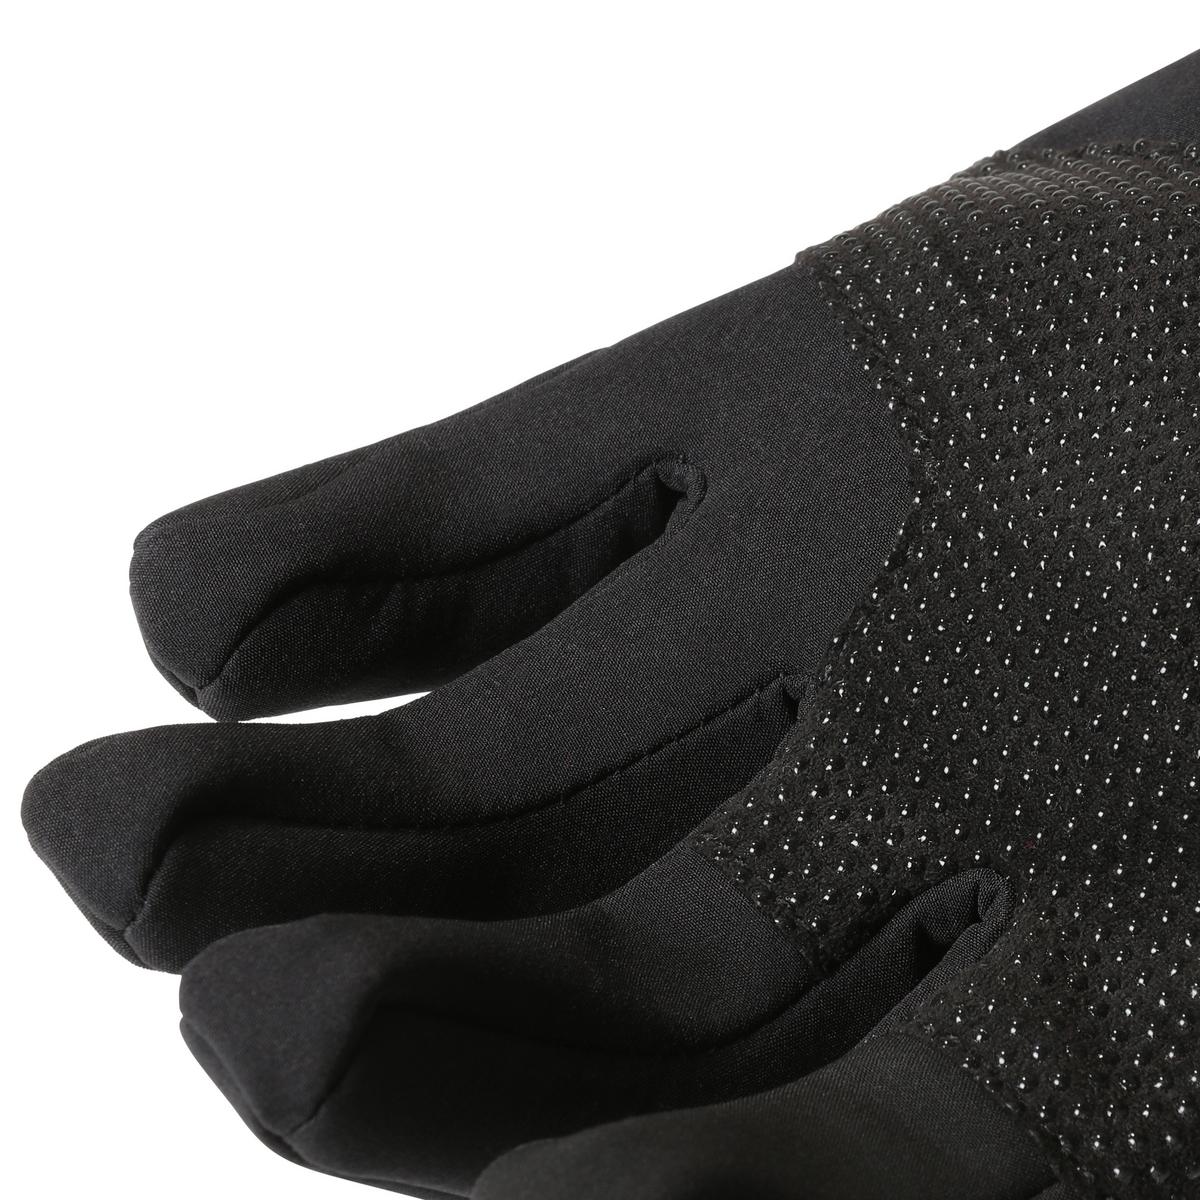 Women's The North Face Apex Etip Insulated Glove | Hiking Gloves ...